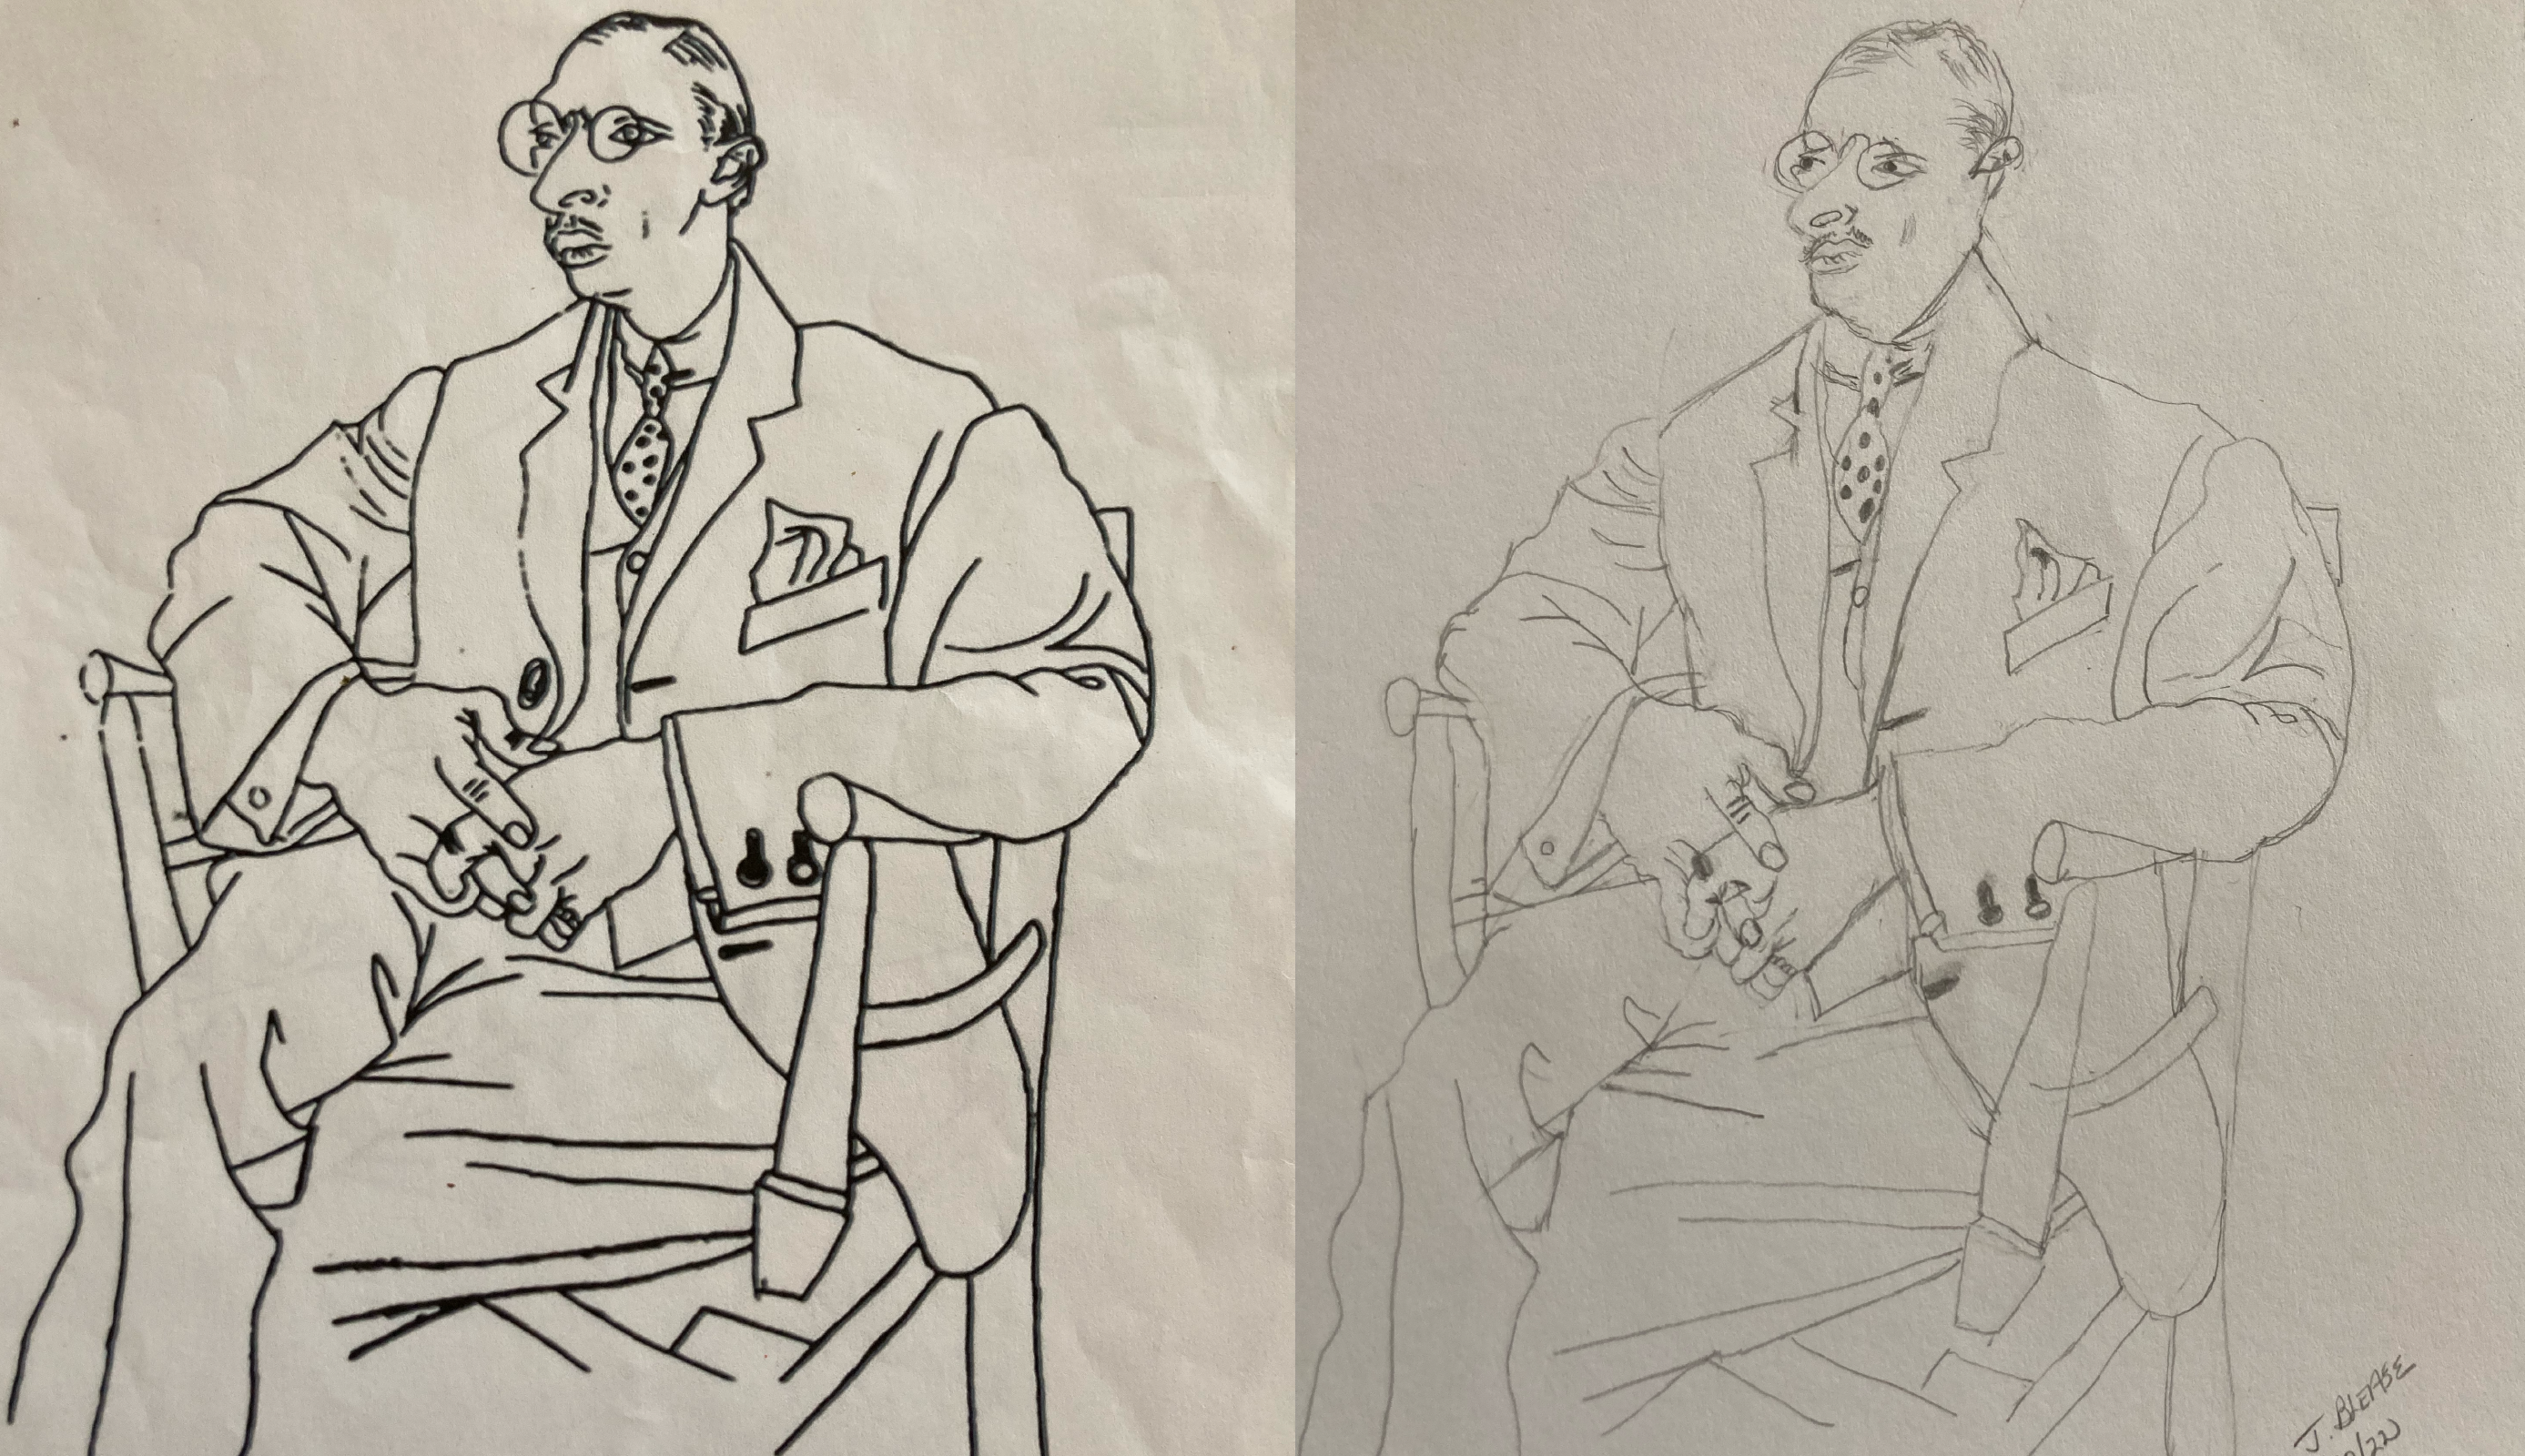 Two sketches are side by side. One is in black pen then other in pencil. They are outlines of the musician Stravinsky as he sits in a chair with a suit on and large circle glasses.